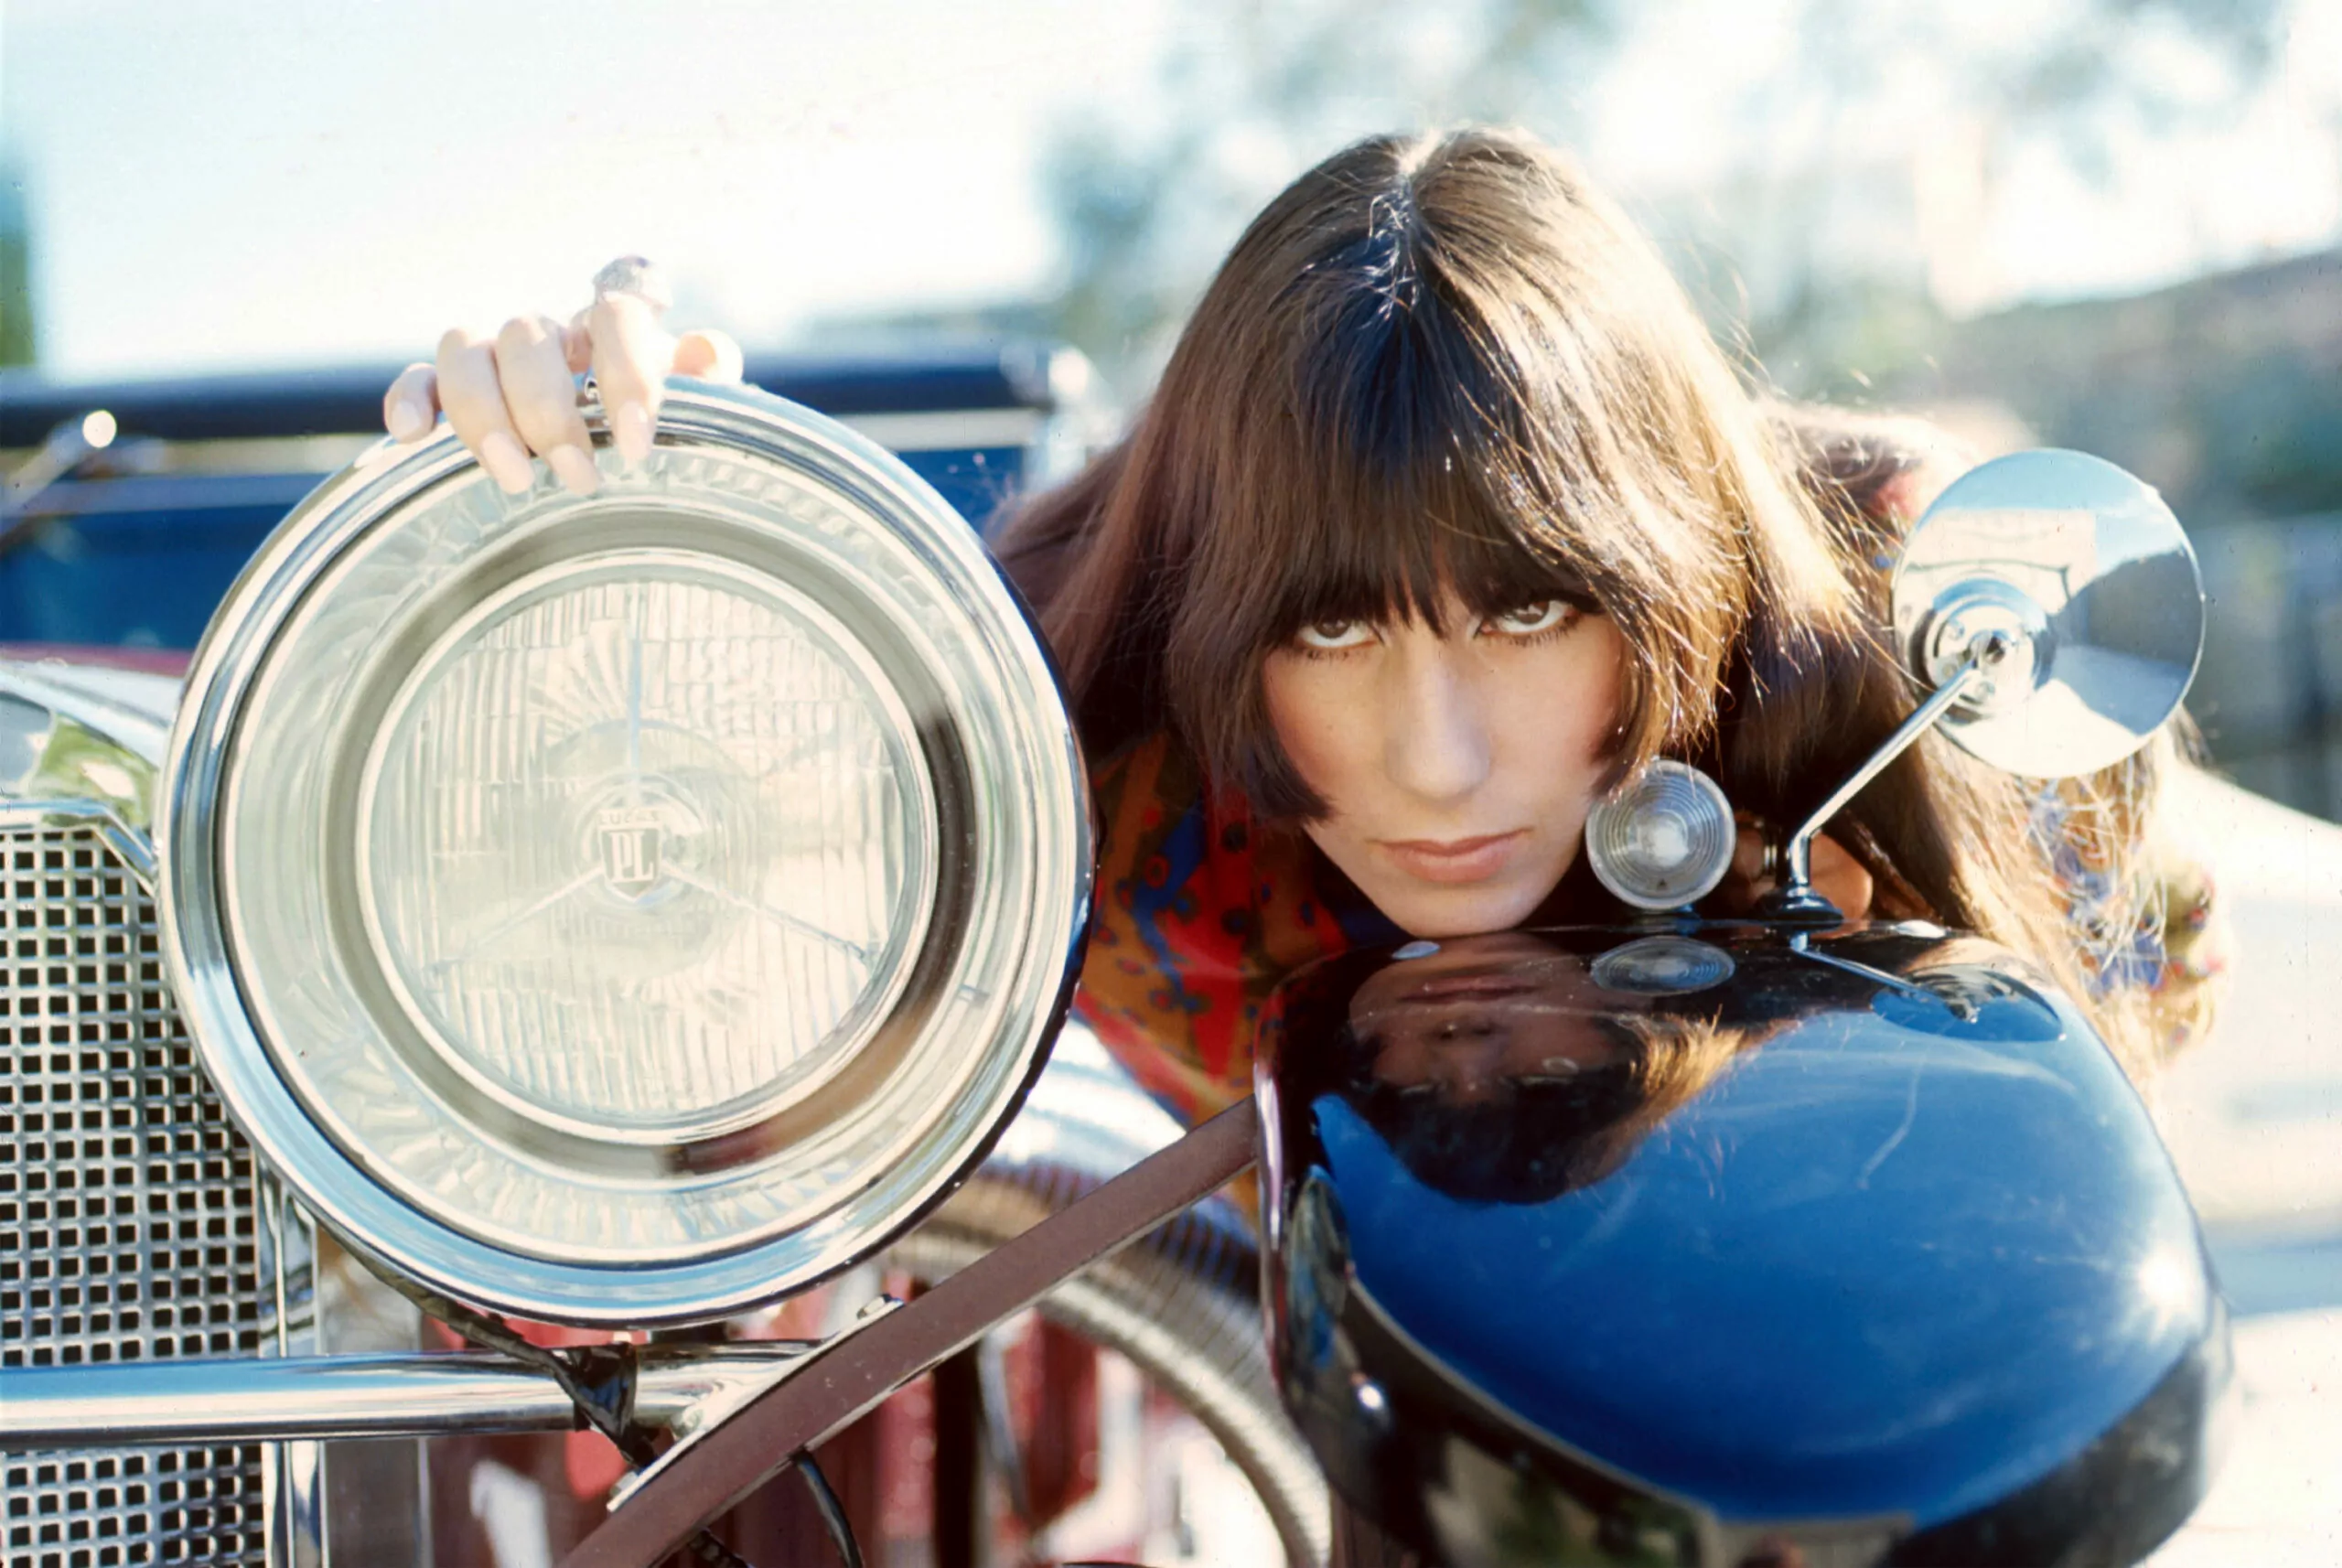 381882 01: Actress/singer Cher poses for a photo, 1966. (Photo by Liaison)